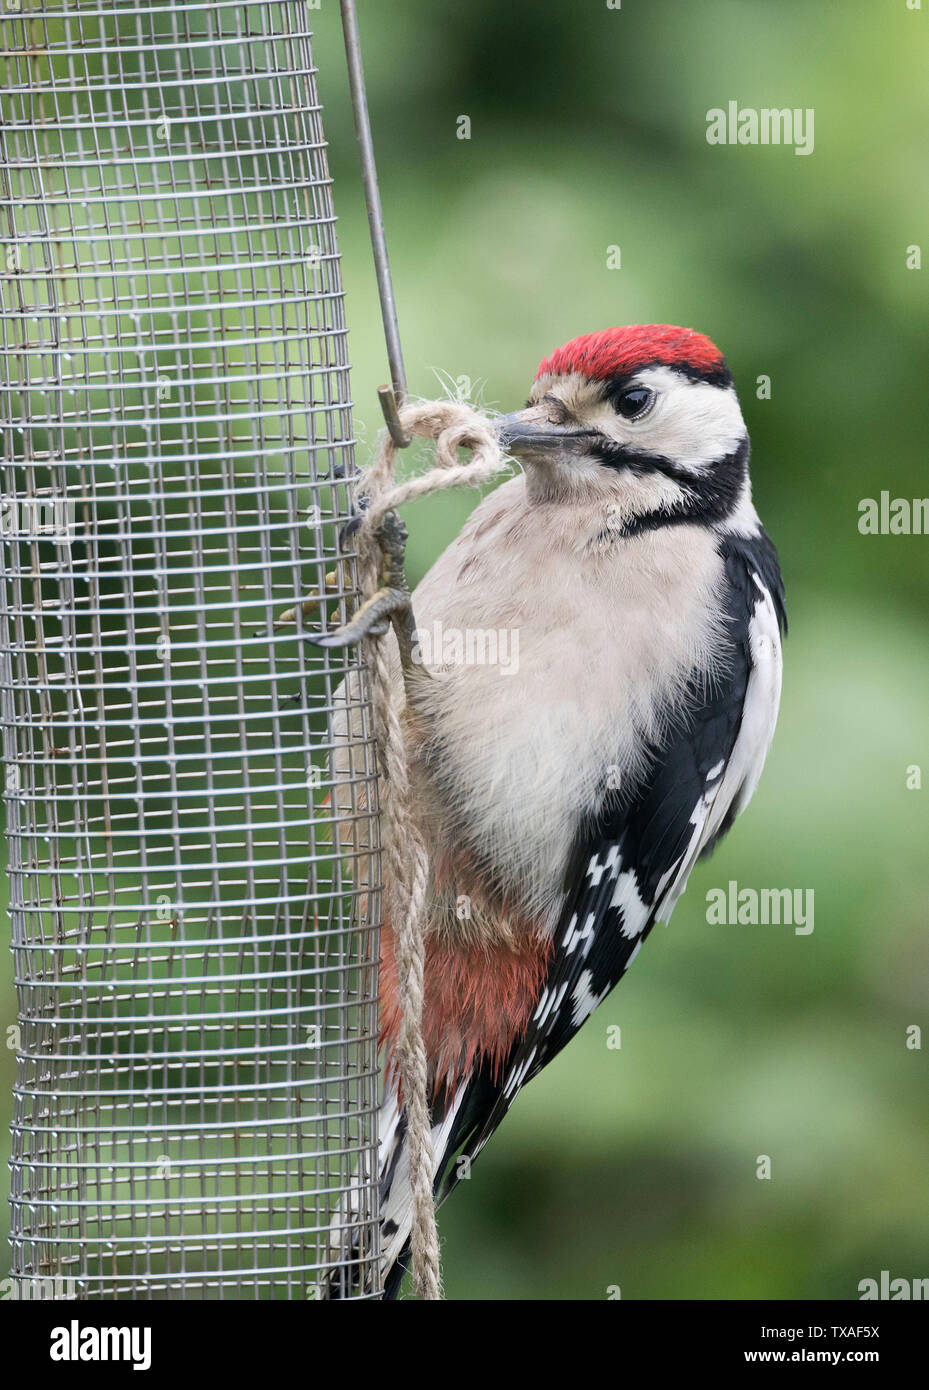 Great Spotted Woodpecker juvenile, Dendrocopos major, attempting to undo a string knot on an empty bird feeder, Horsham, West Sussex. June 2019 Stock Photo